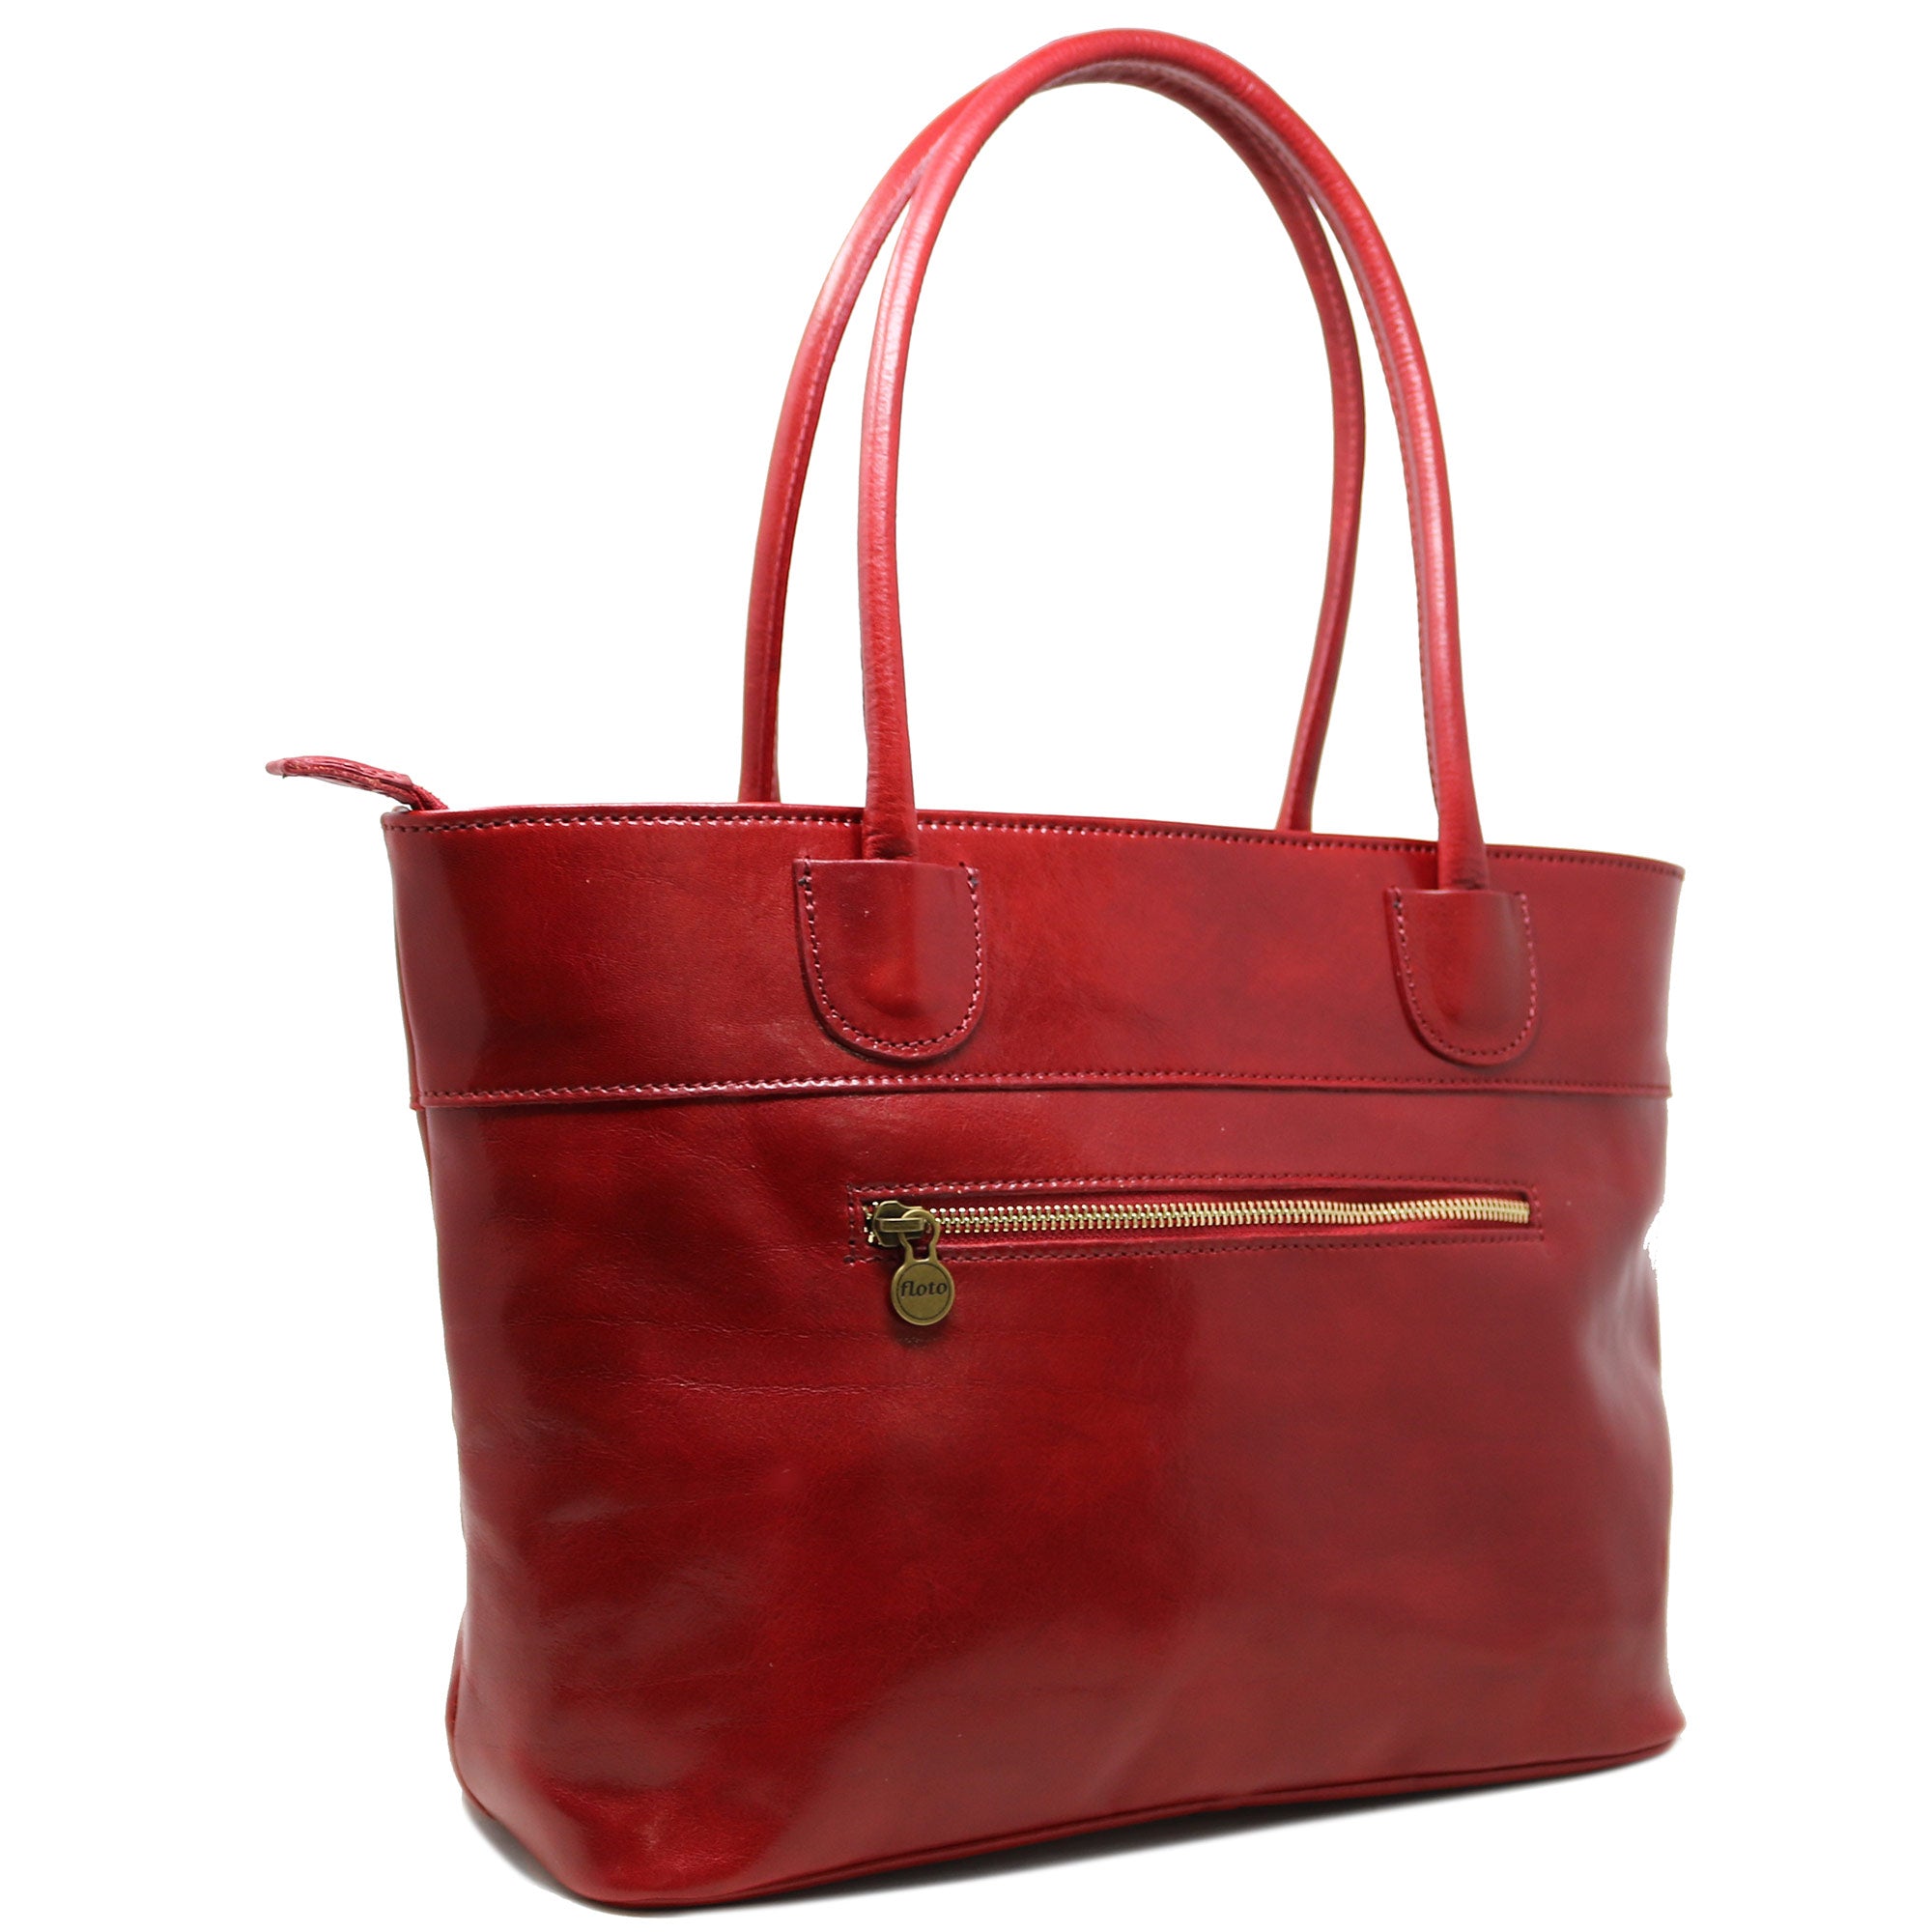 Roots Canada messenger bag in red to black ombre leather | Bags, Leather,  Purses